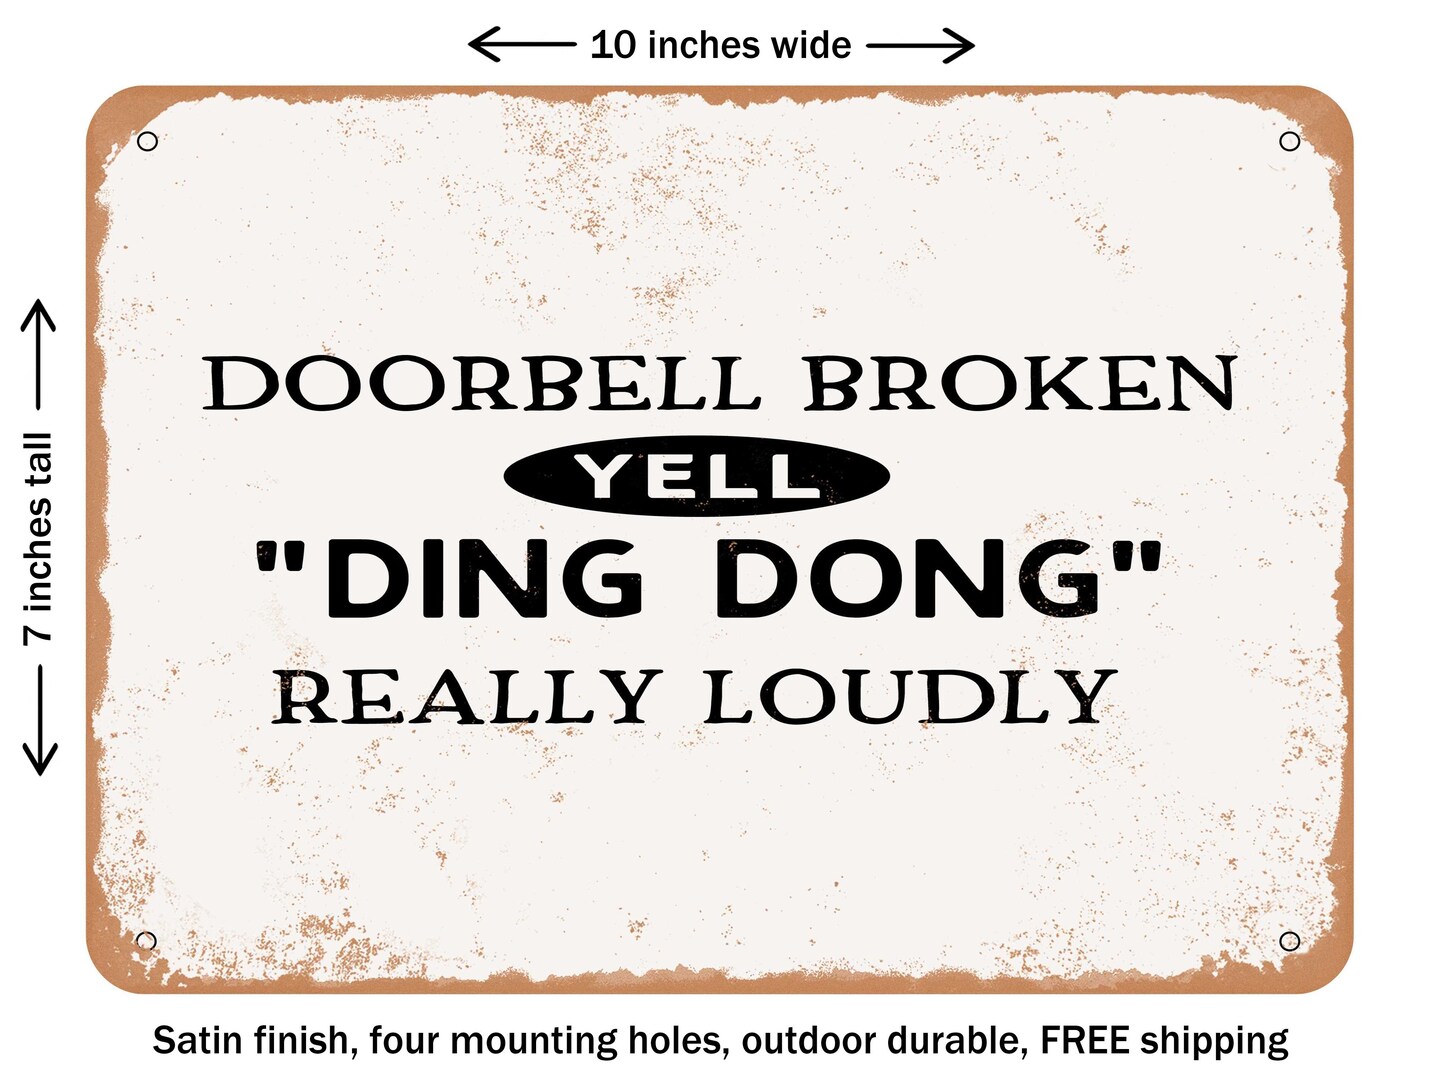 DECORATIVE METAL SIGN - Doorbell Broken Yell Ding Dong Really Loudly - 2 - Vintage Rusty Look